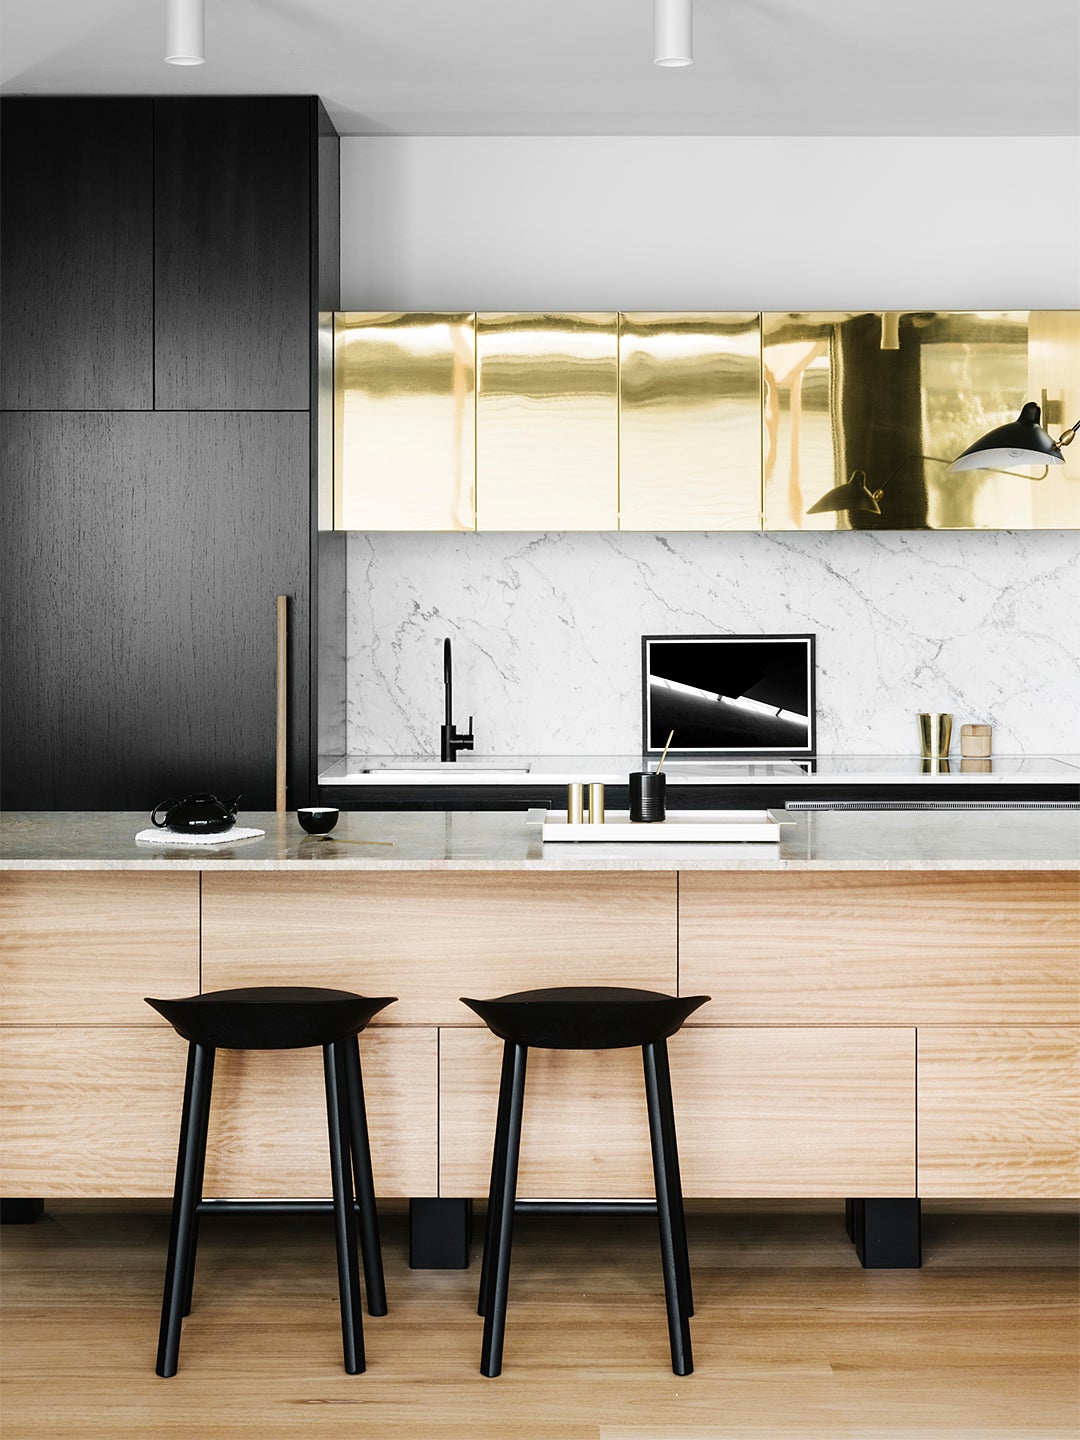 Kitchen with shiny brass upper cabinets